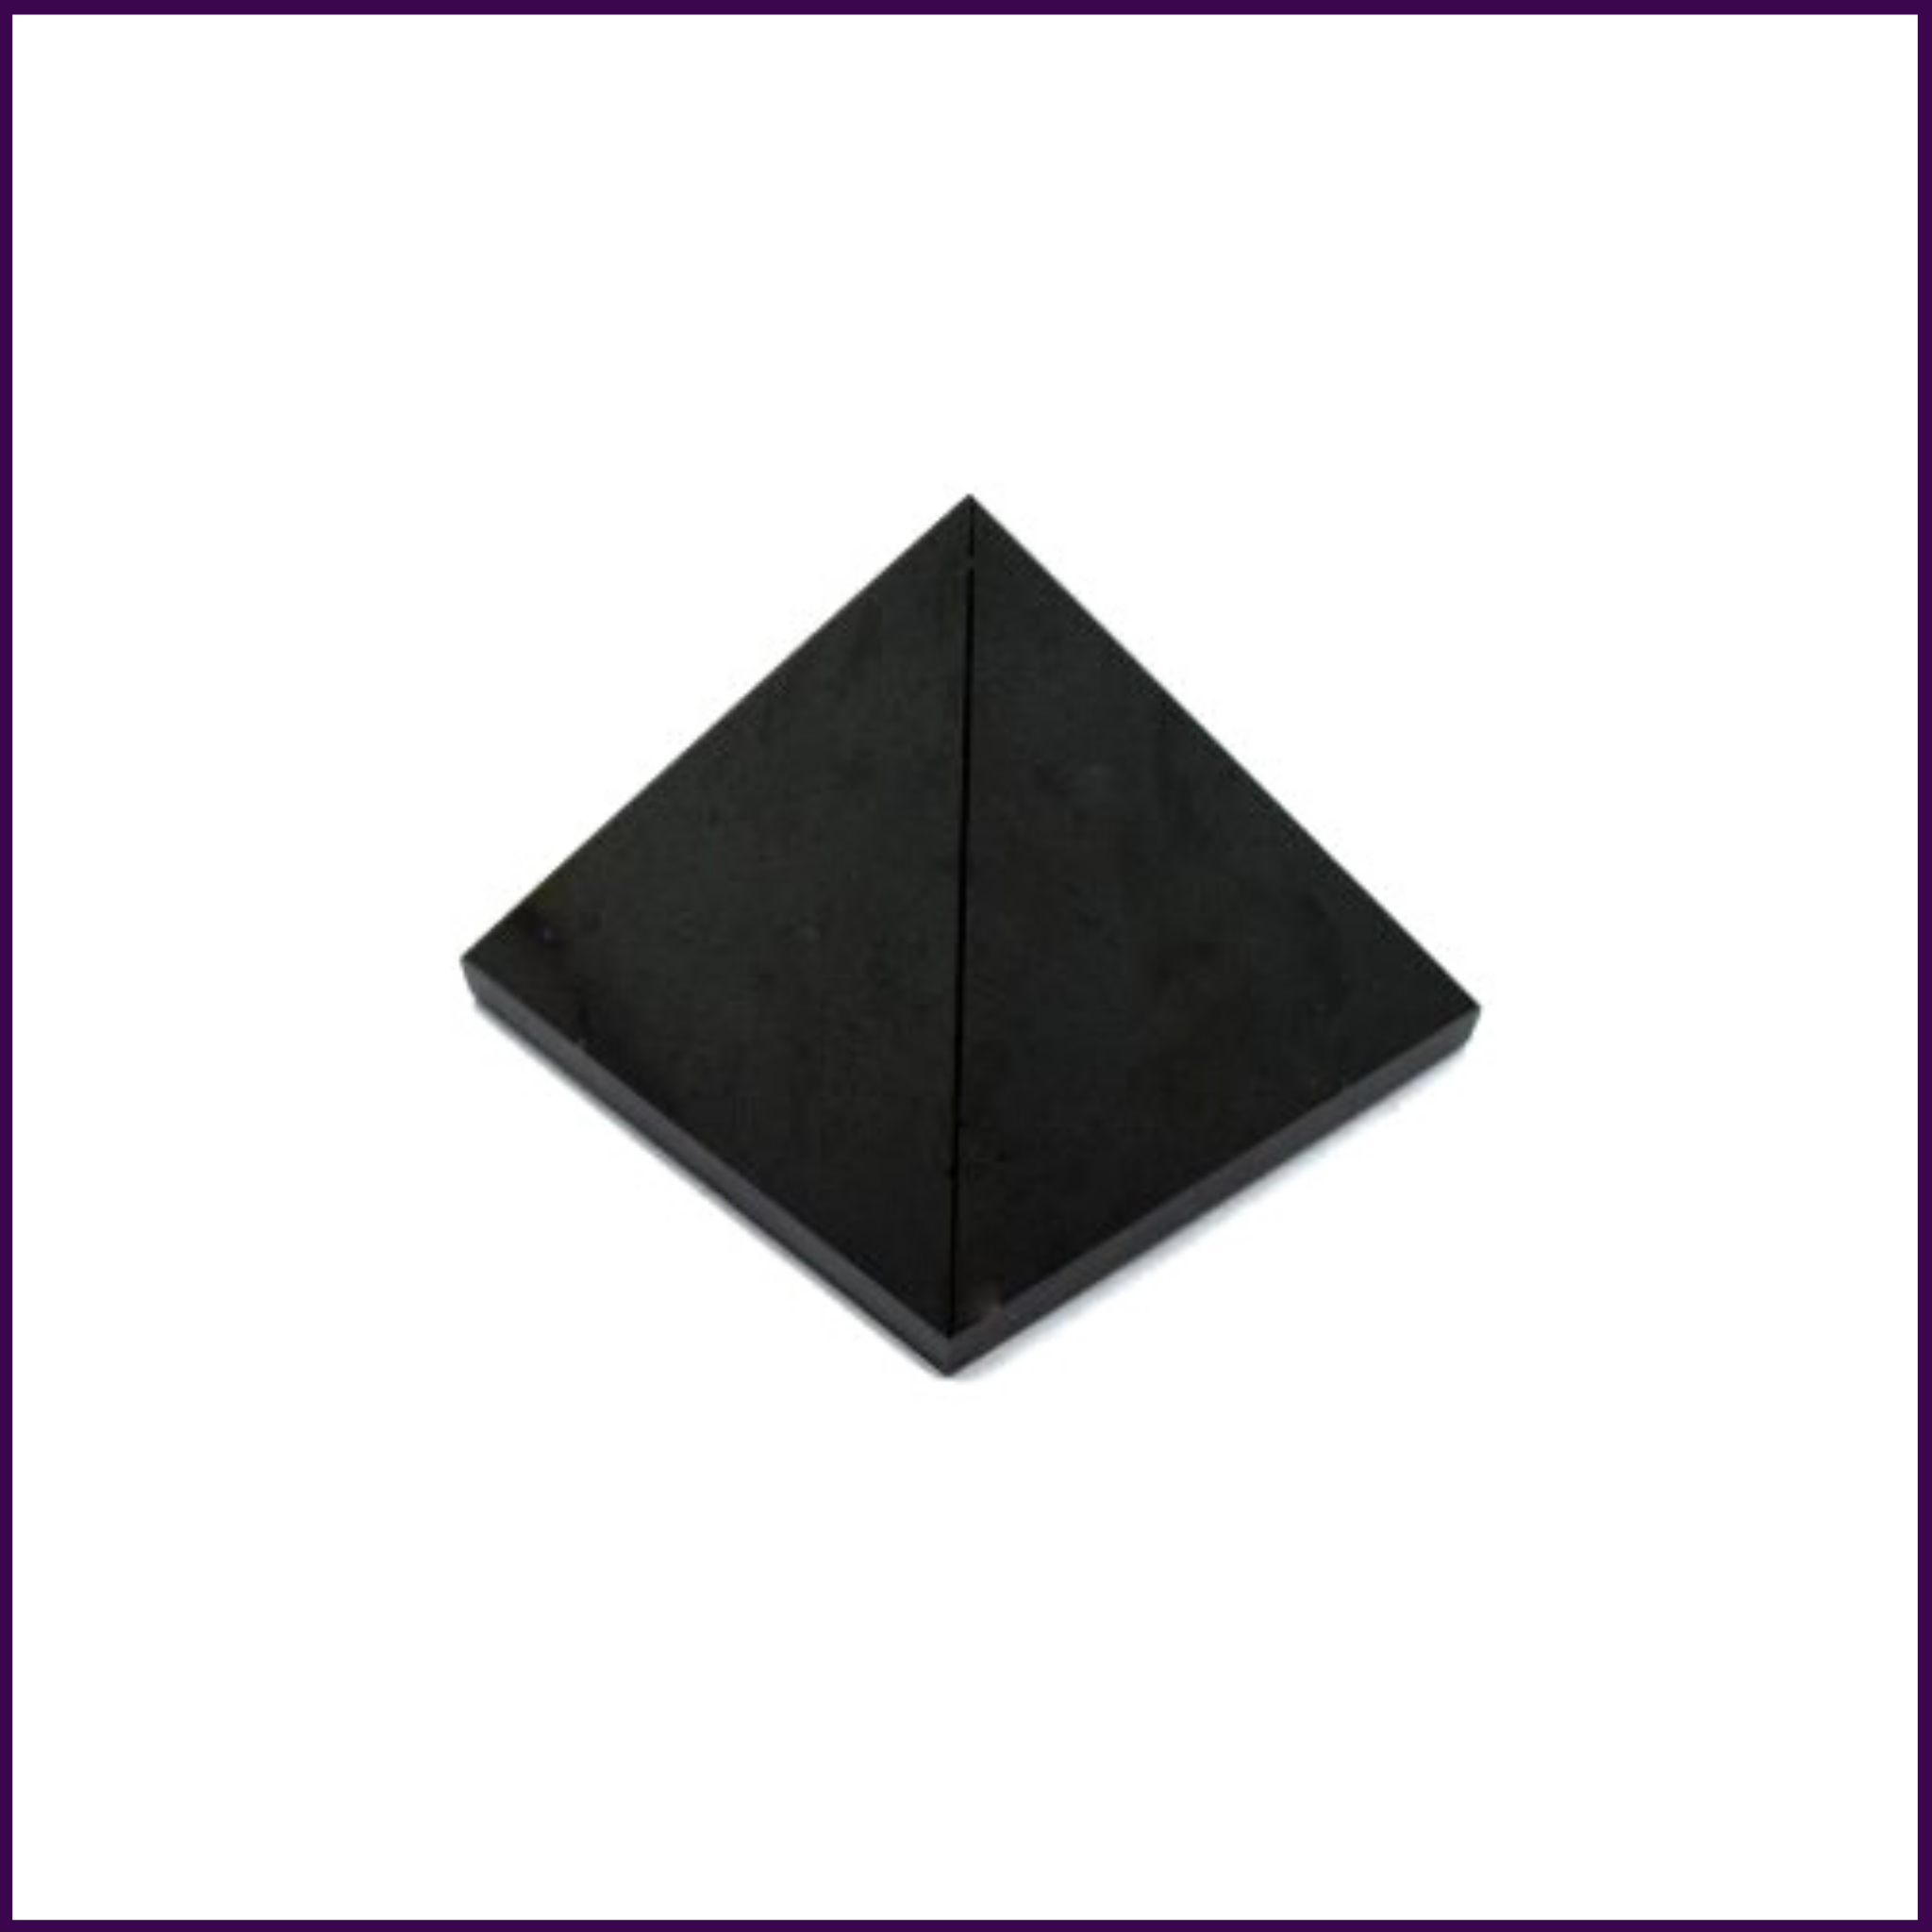 Black Agate Pyramid Stone(2inch) for Protection Against Black Magic & Evil Spirits & Removes Negativity from Your Aura - 51pyramids